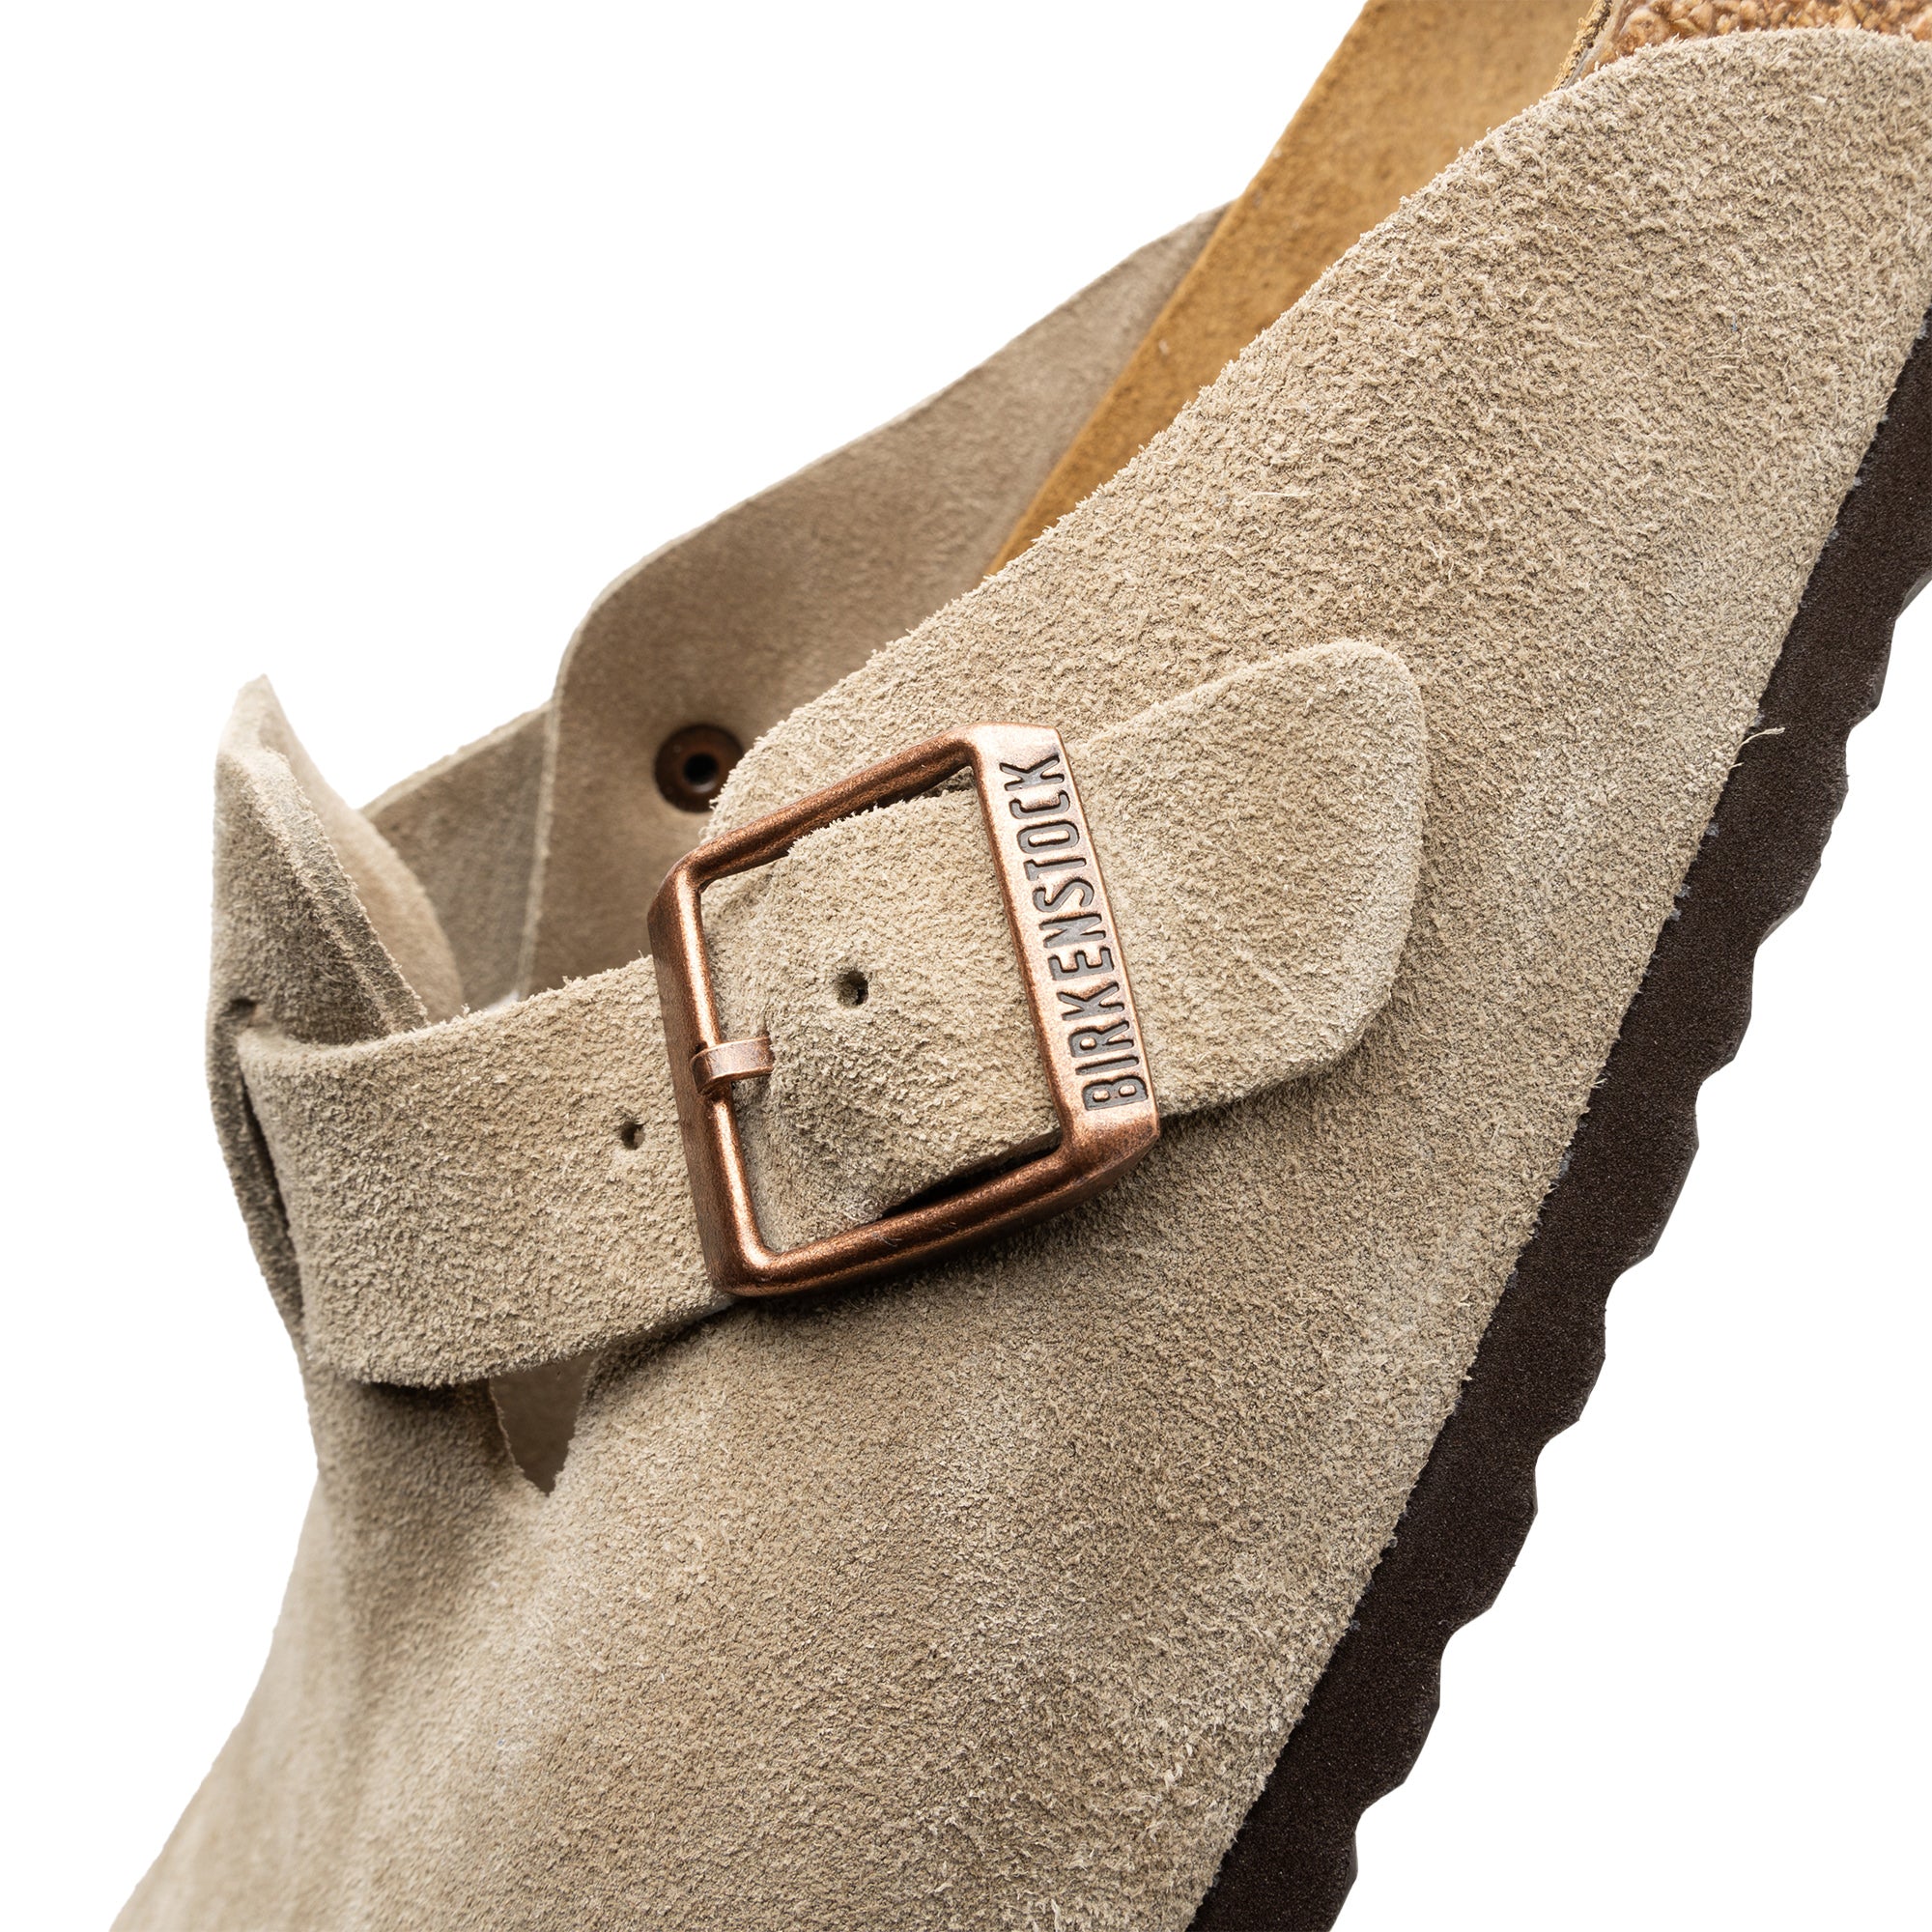 Cushioned suede footbed lining